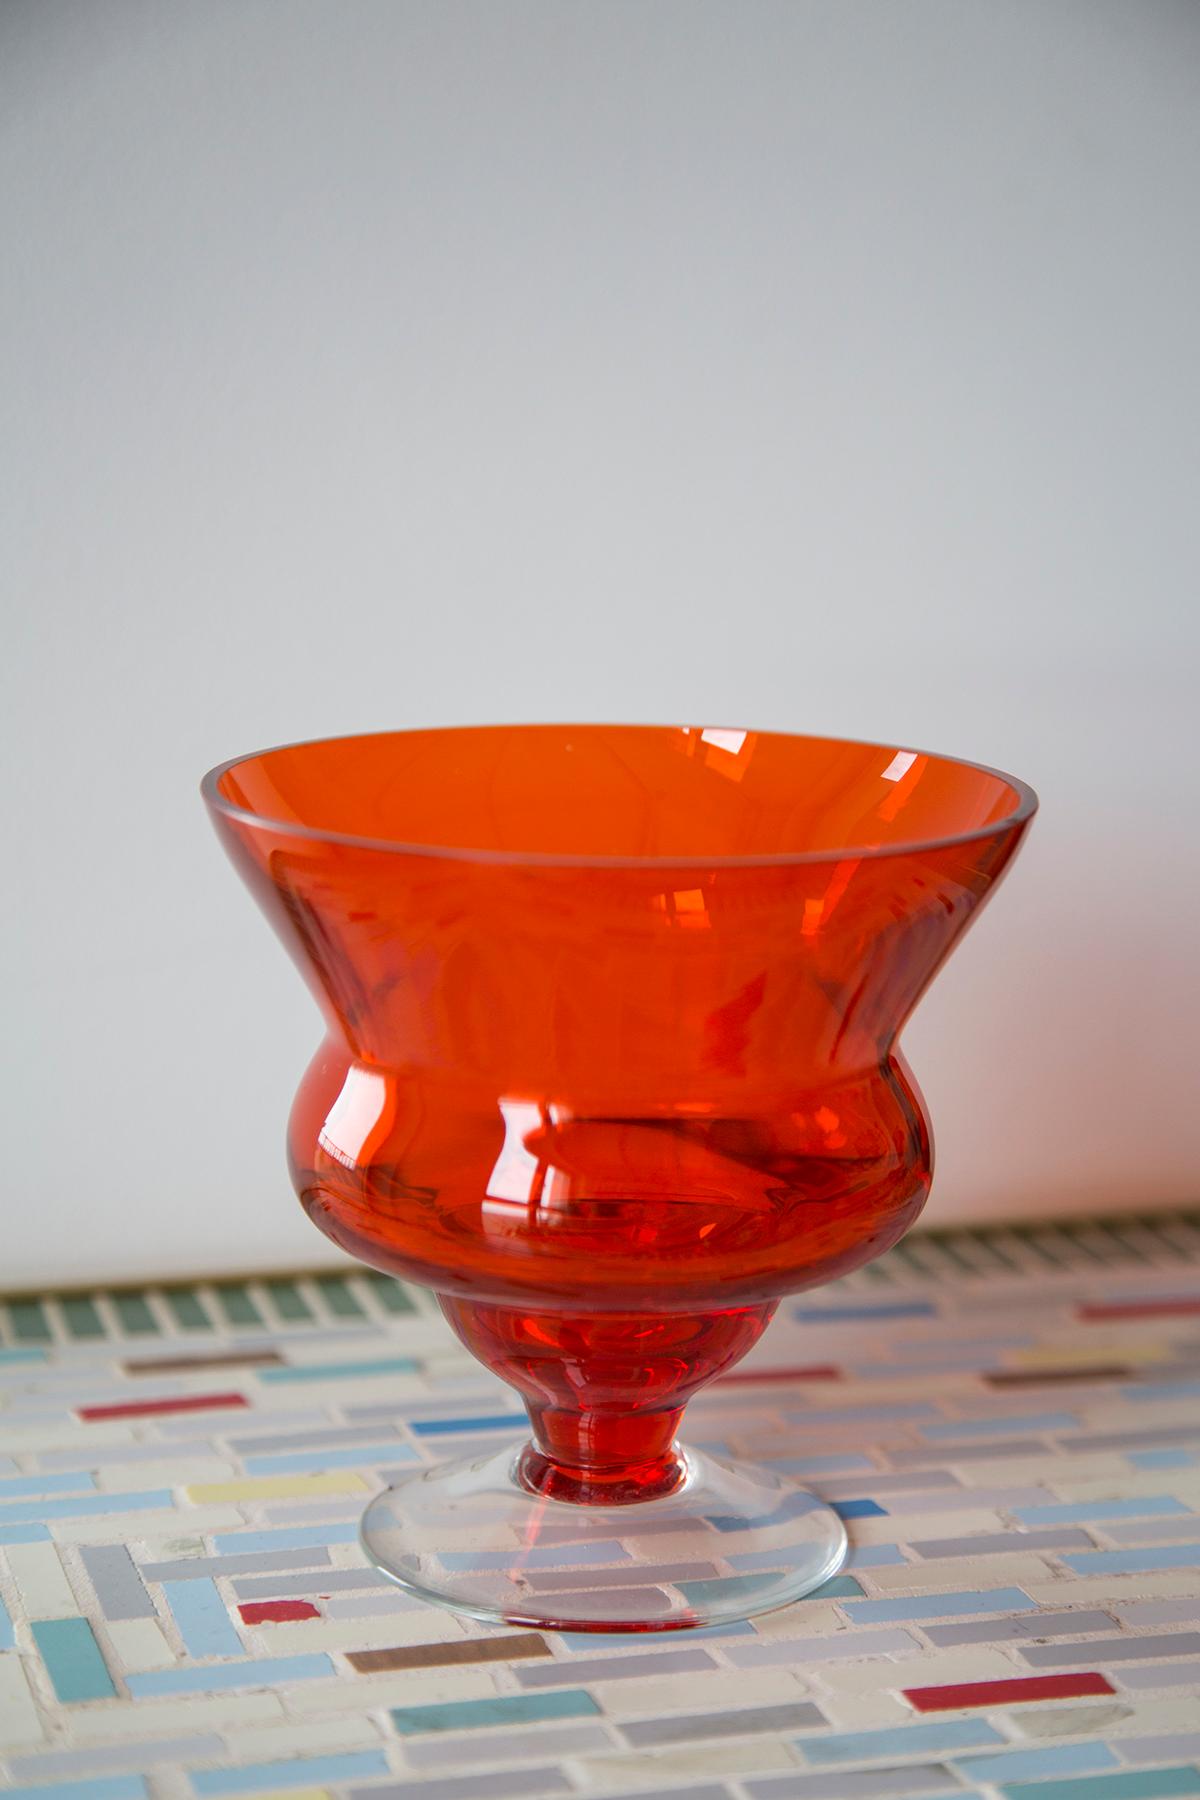 Vase made in the Tarnowiec Glassworks located in Poland, 
designed by J. Słuczan-Orkusz. 
Soda glass, mass-colored, hand-formed. 
Vintage product from 1970s

Dimensions: height 12 cm round 12cm

Good condition, minor scratches on the bottom caused